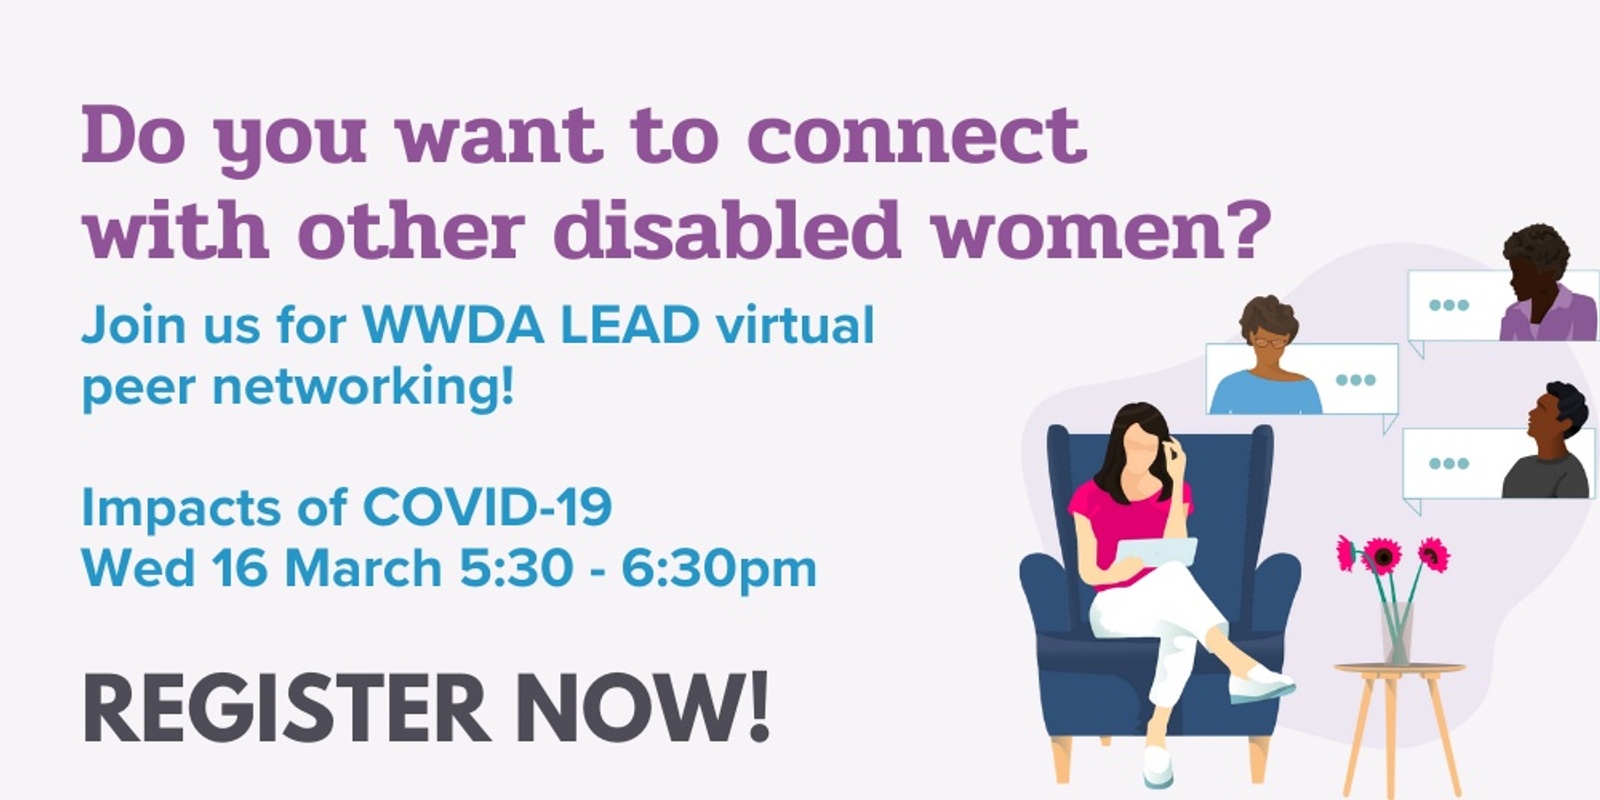 Banner image for WWDA LEAD Peer Networking - Impacts of Covid-19 Session